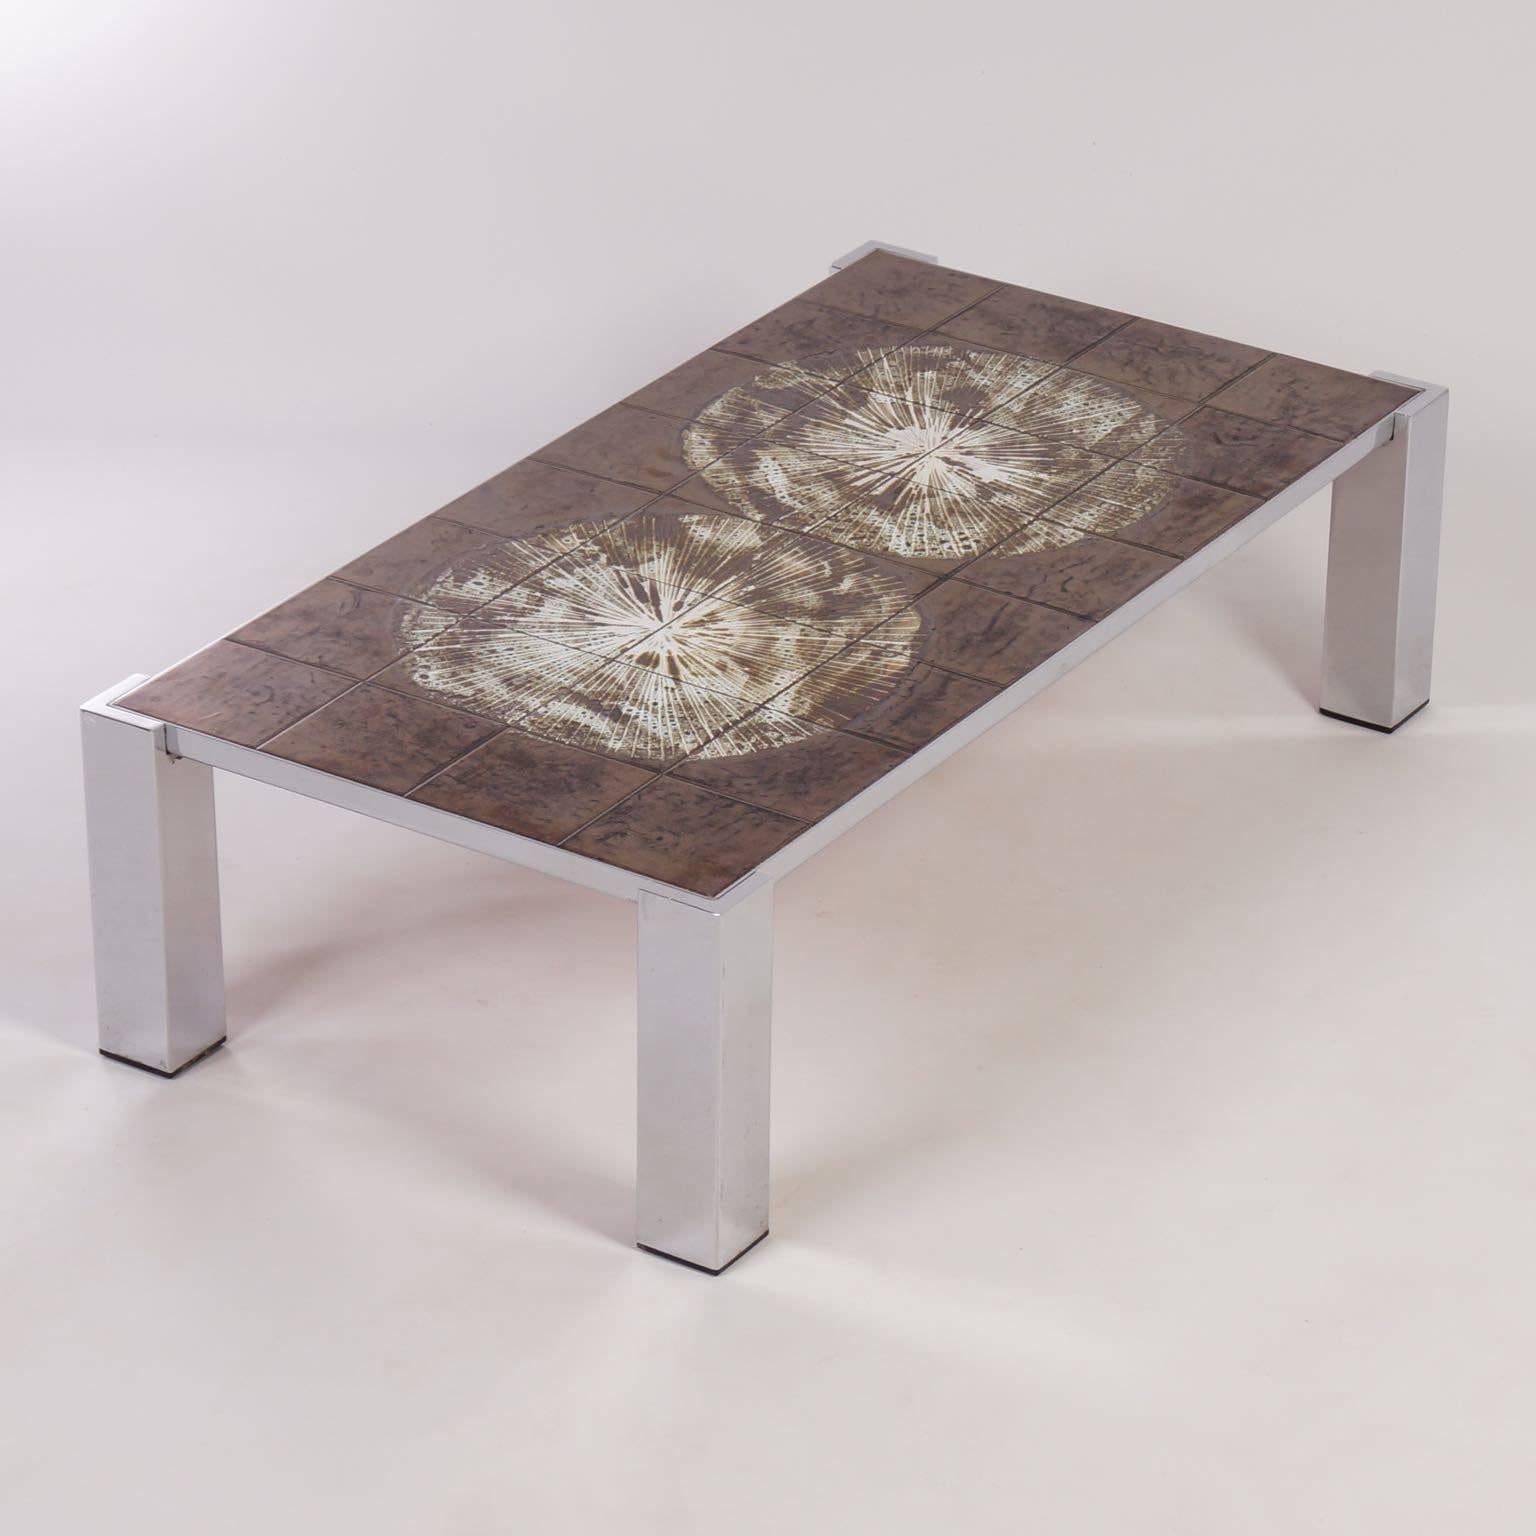 Belgian Hand-Painted Tile Coffee Table by Belarti, 1960s For Sale